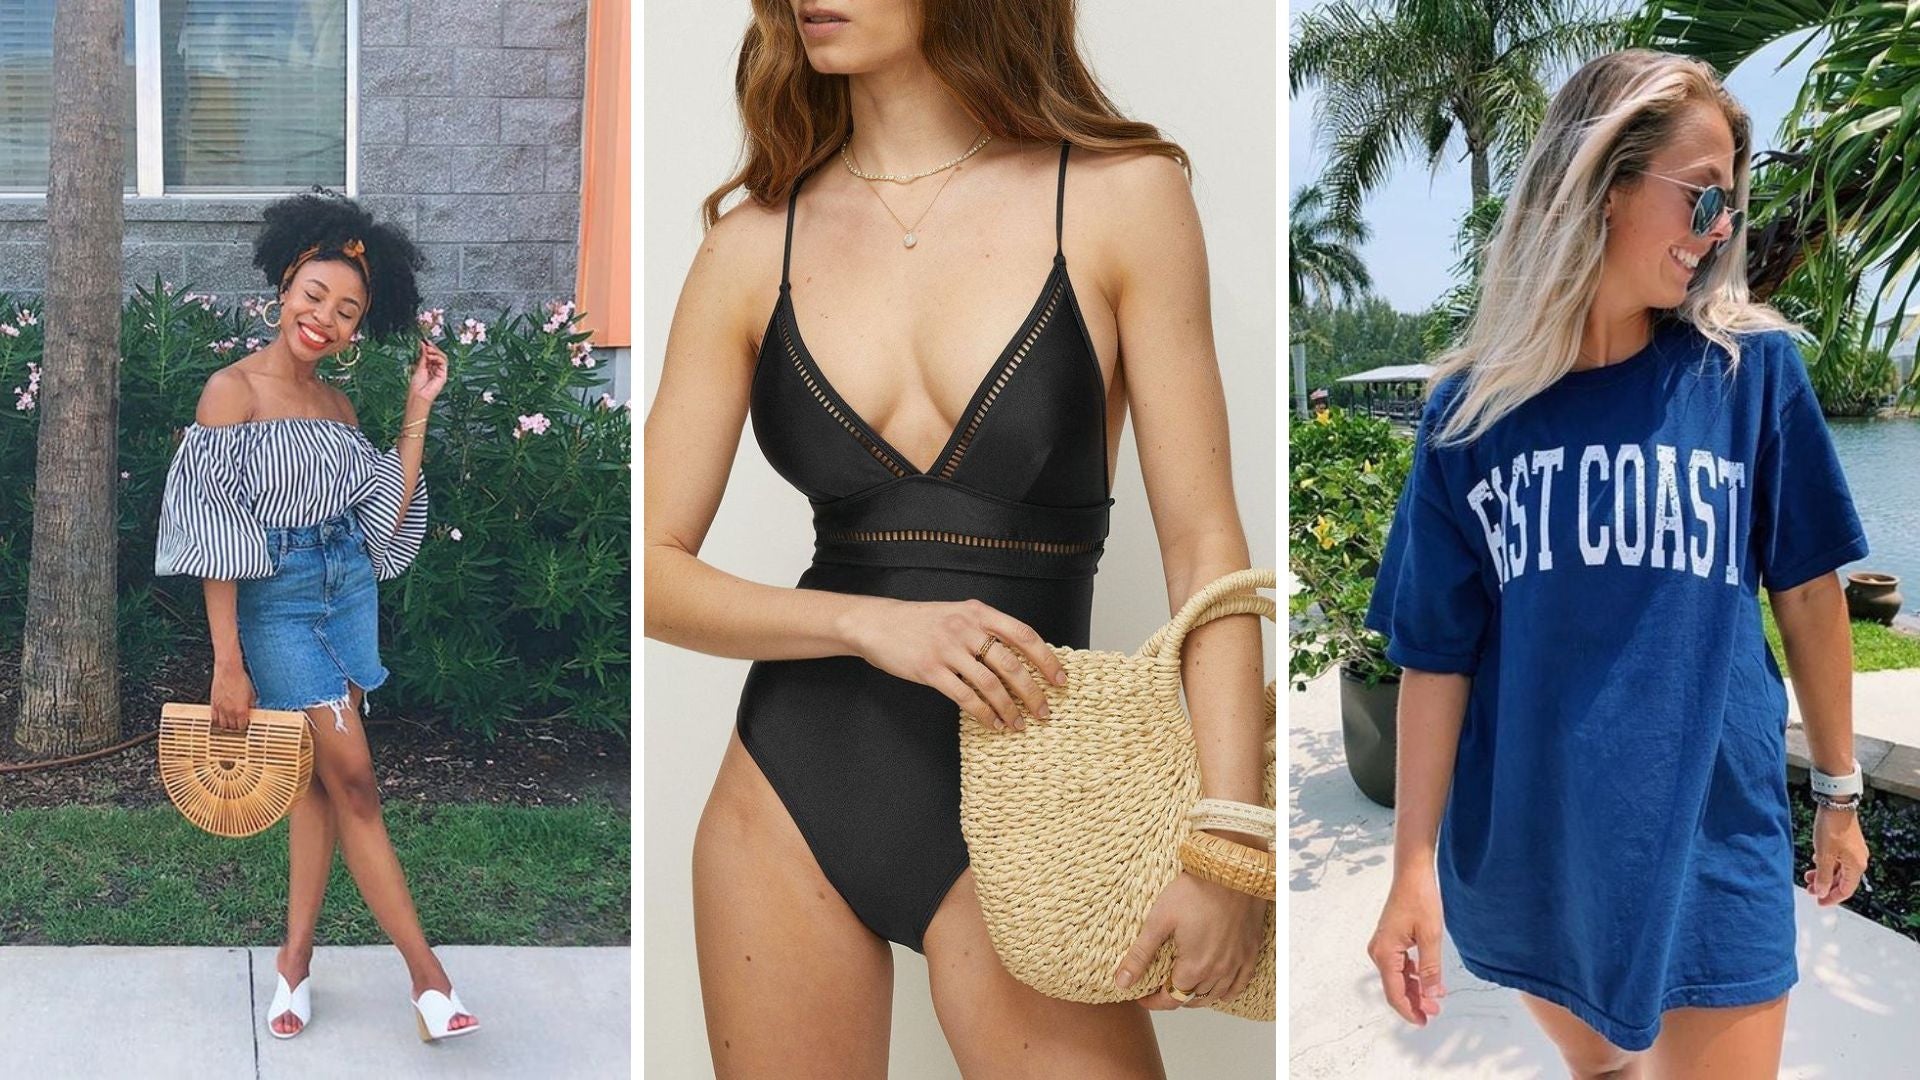 Alternative Beach Outfits: Staying Cool And Stylish